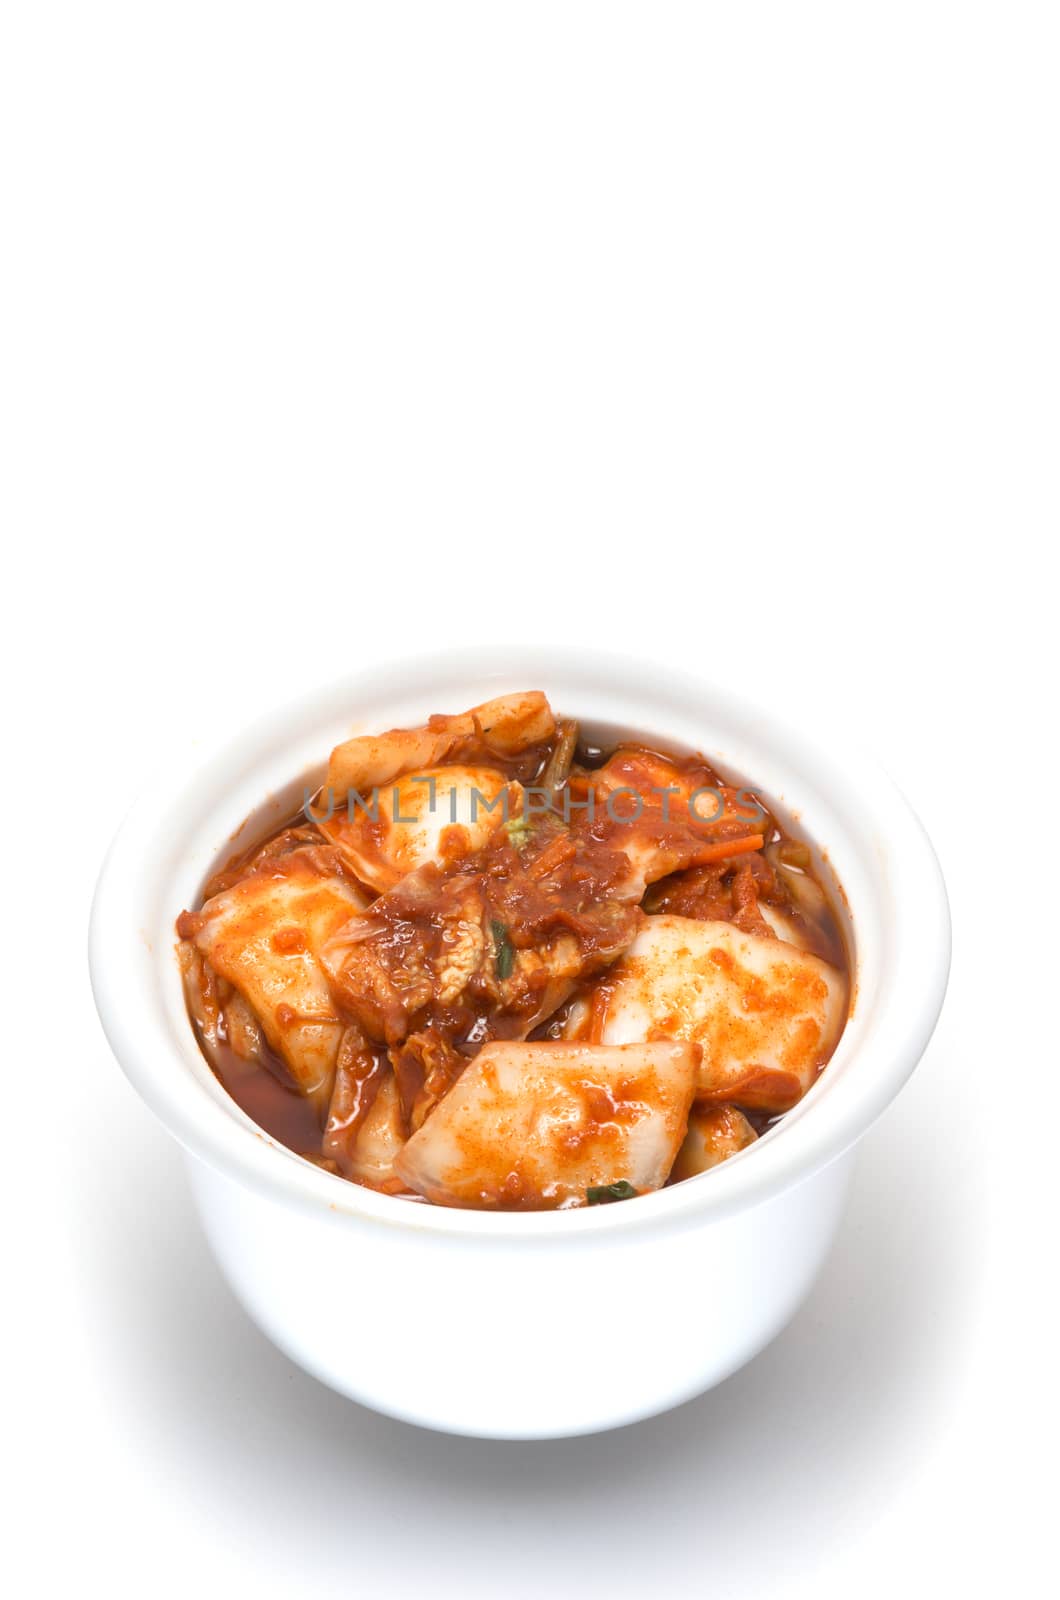 korean cuisine, fermented food Kimchi on white bowl with copy space 